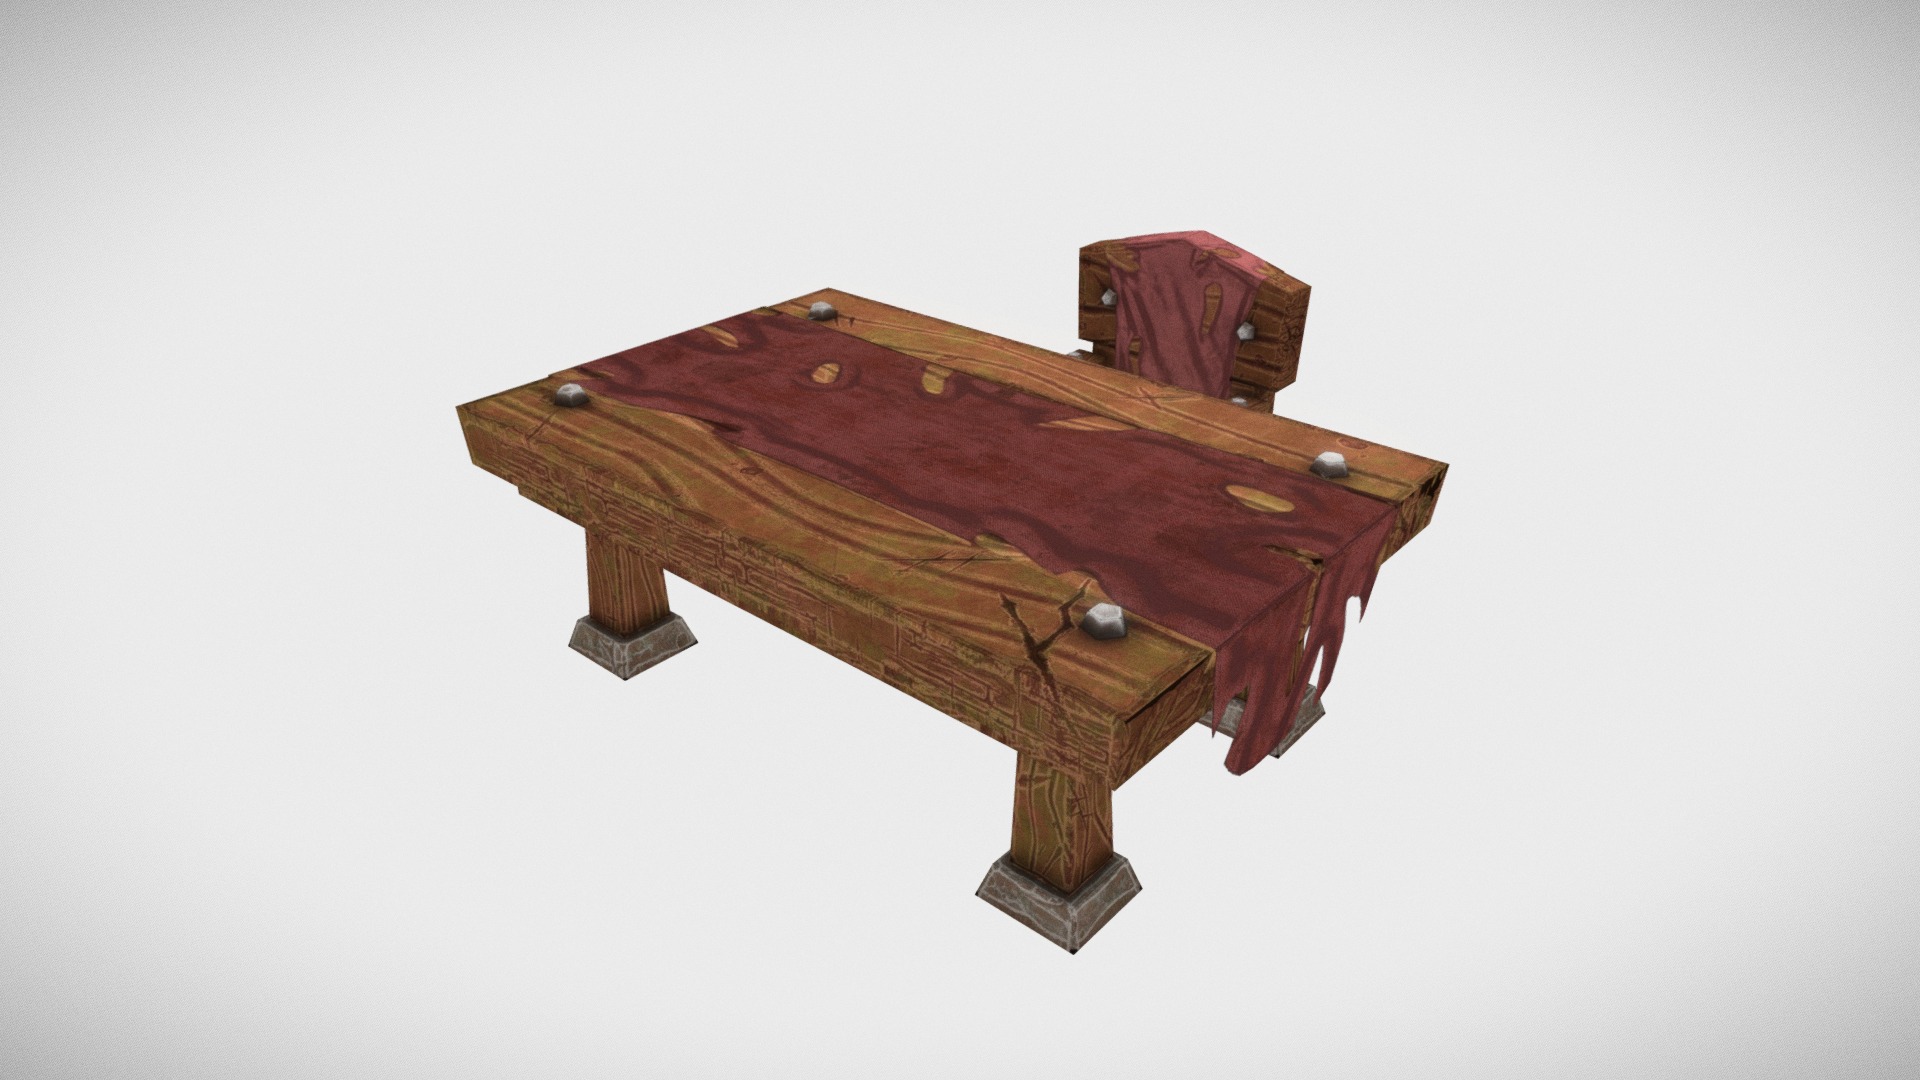 3D model Stylized Table - This is a 3D model of the Stylized Table. The 3D model is about a wooden table with a metal frame.